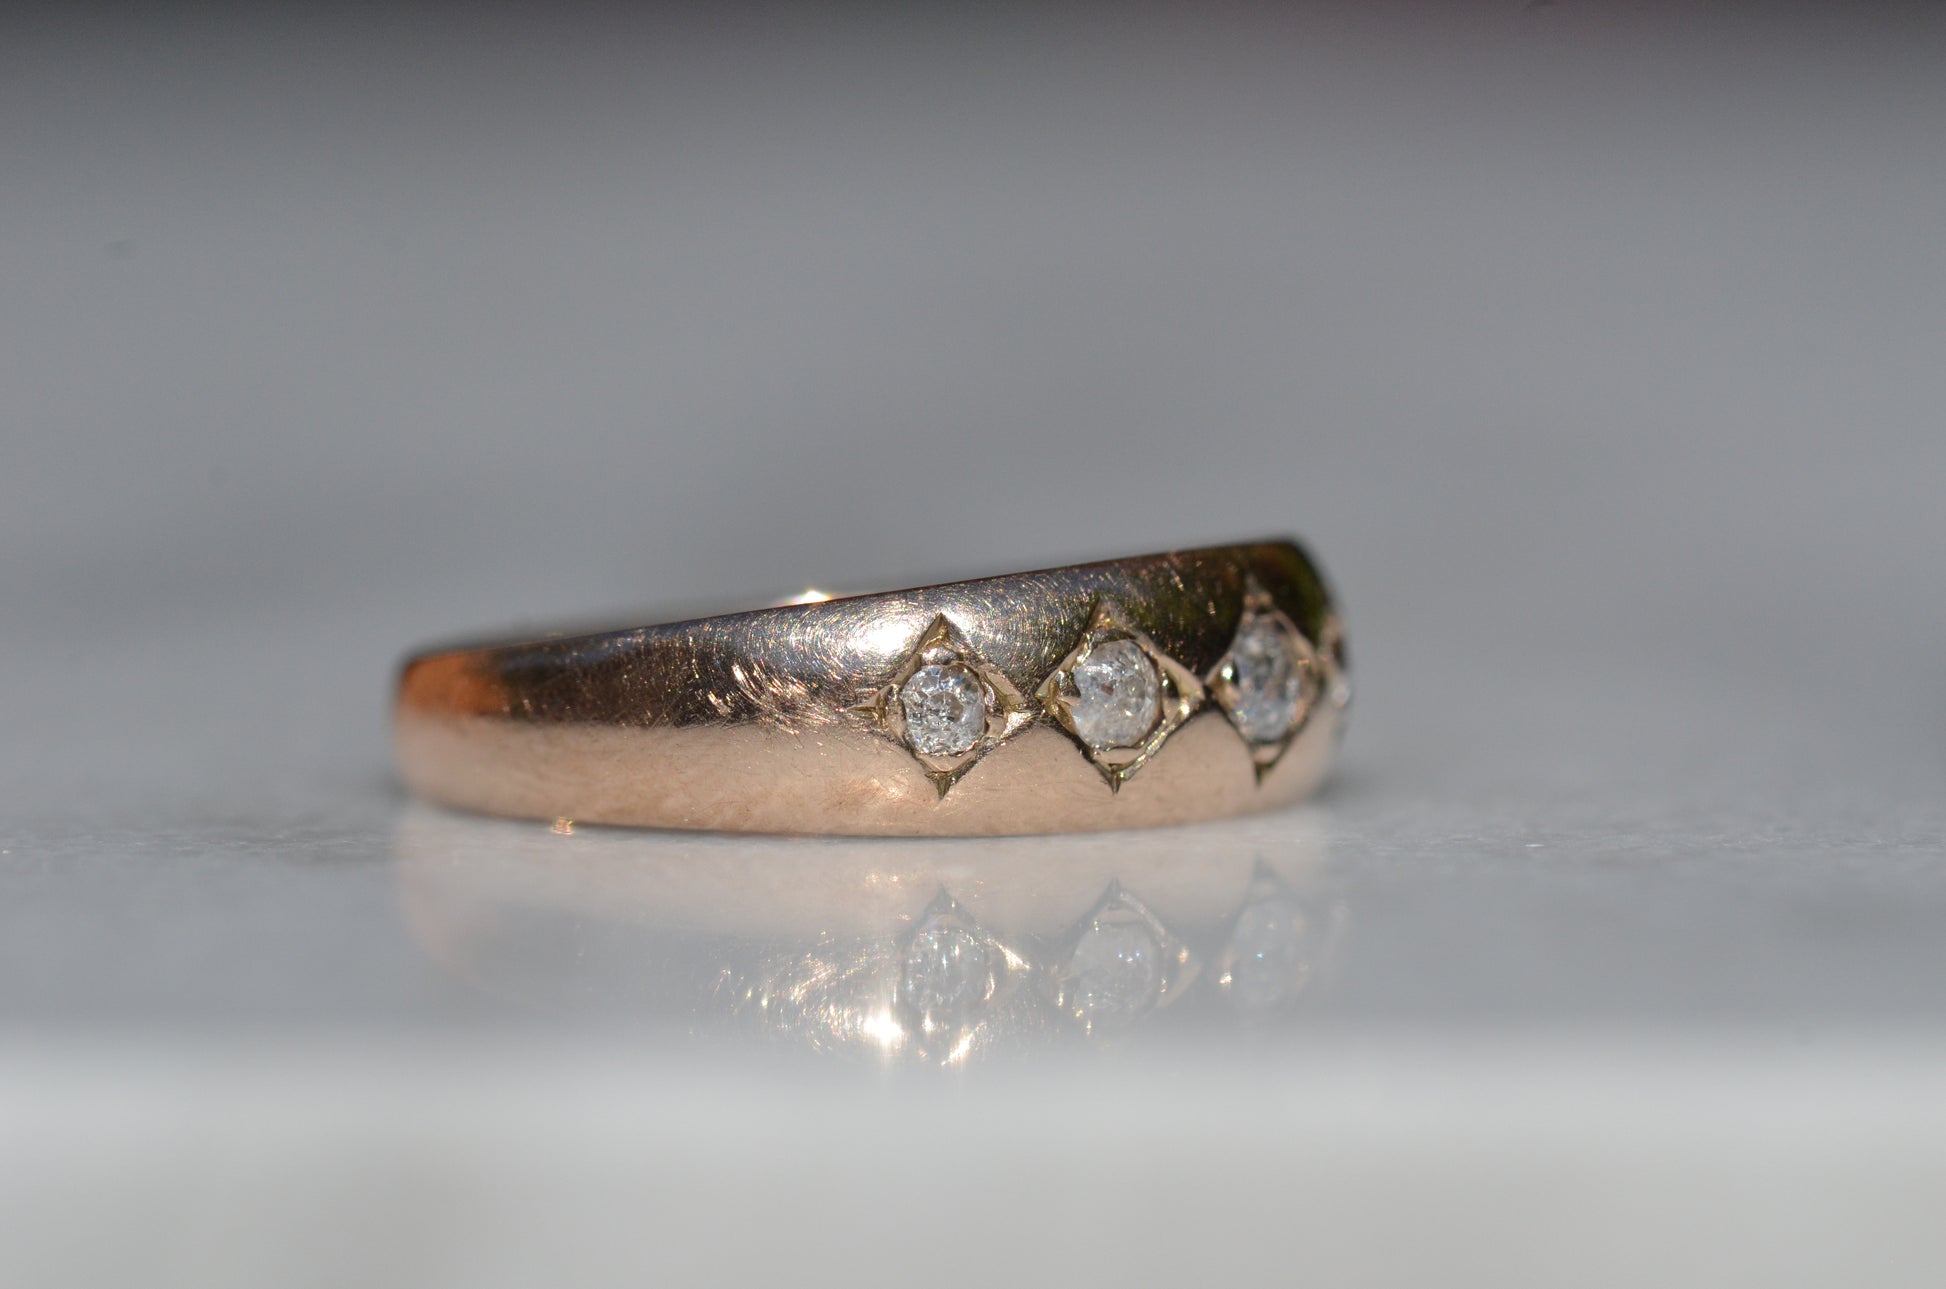 A tightly-cropped macro shot of the Victorian ring, showing the hand-cut diamond-shaped frames that hold each cushion-shaped stone. The old mine cut diamonds have internal fractures and inclusions but still sparkle in the direct sun, and the gold is weathered from a century of wear. The ring is facing slightly to the right, to better see the detail of the tapering side stones.